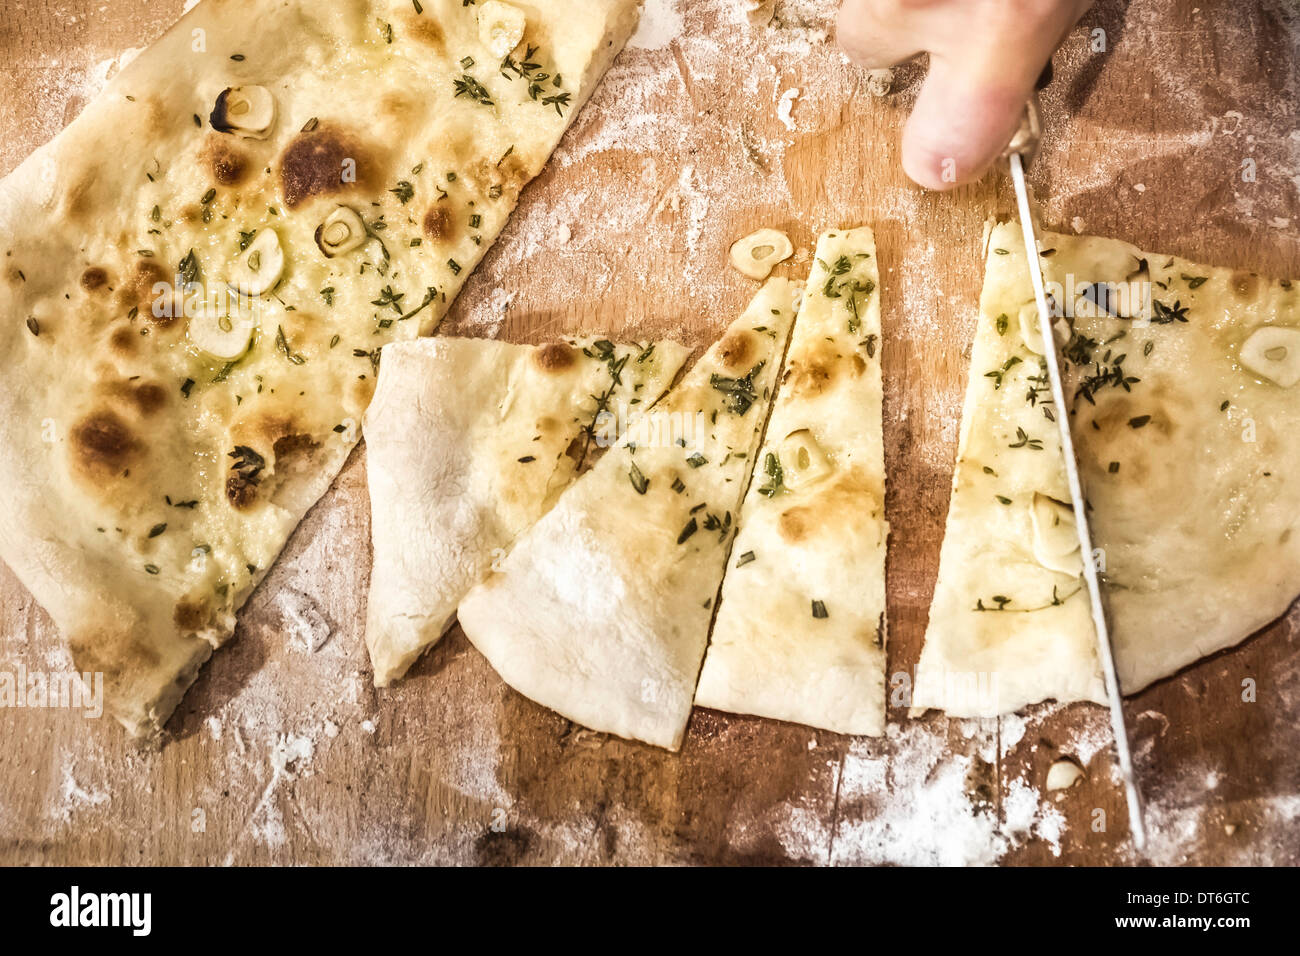 Chef's hand slicing pizza bread in commercial kitchen Stock Photo